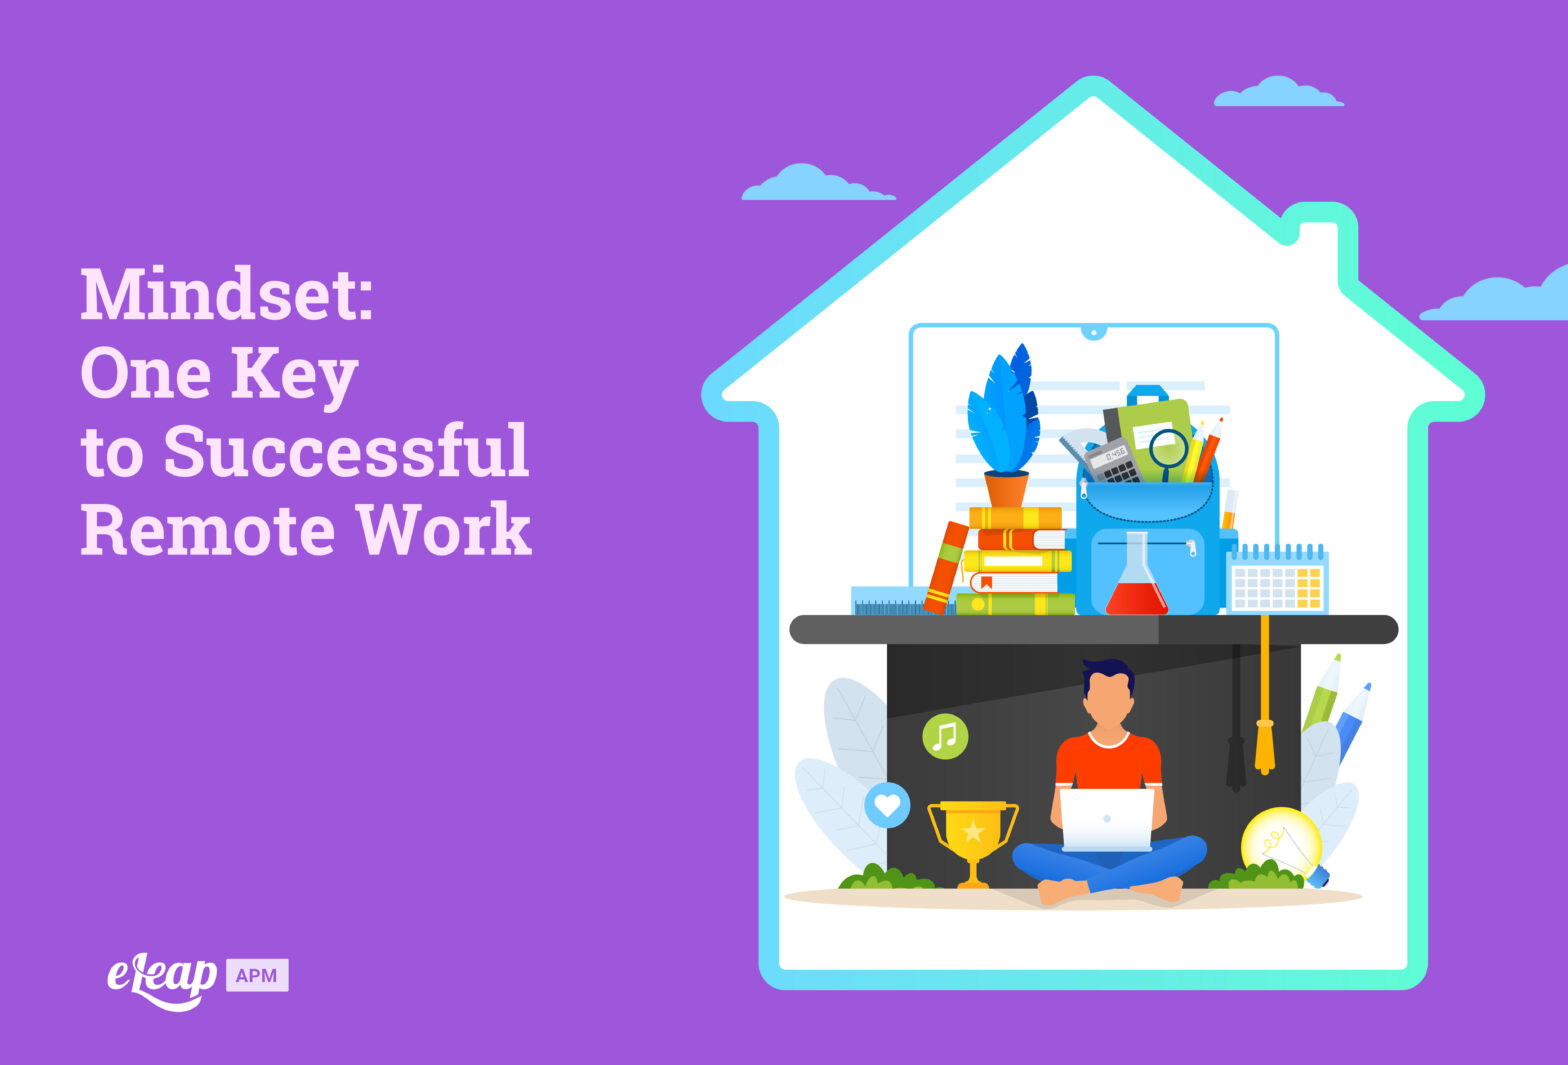 Mindset: One Key to Successful Remote Work